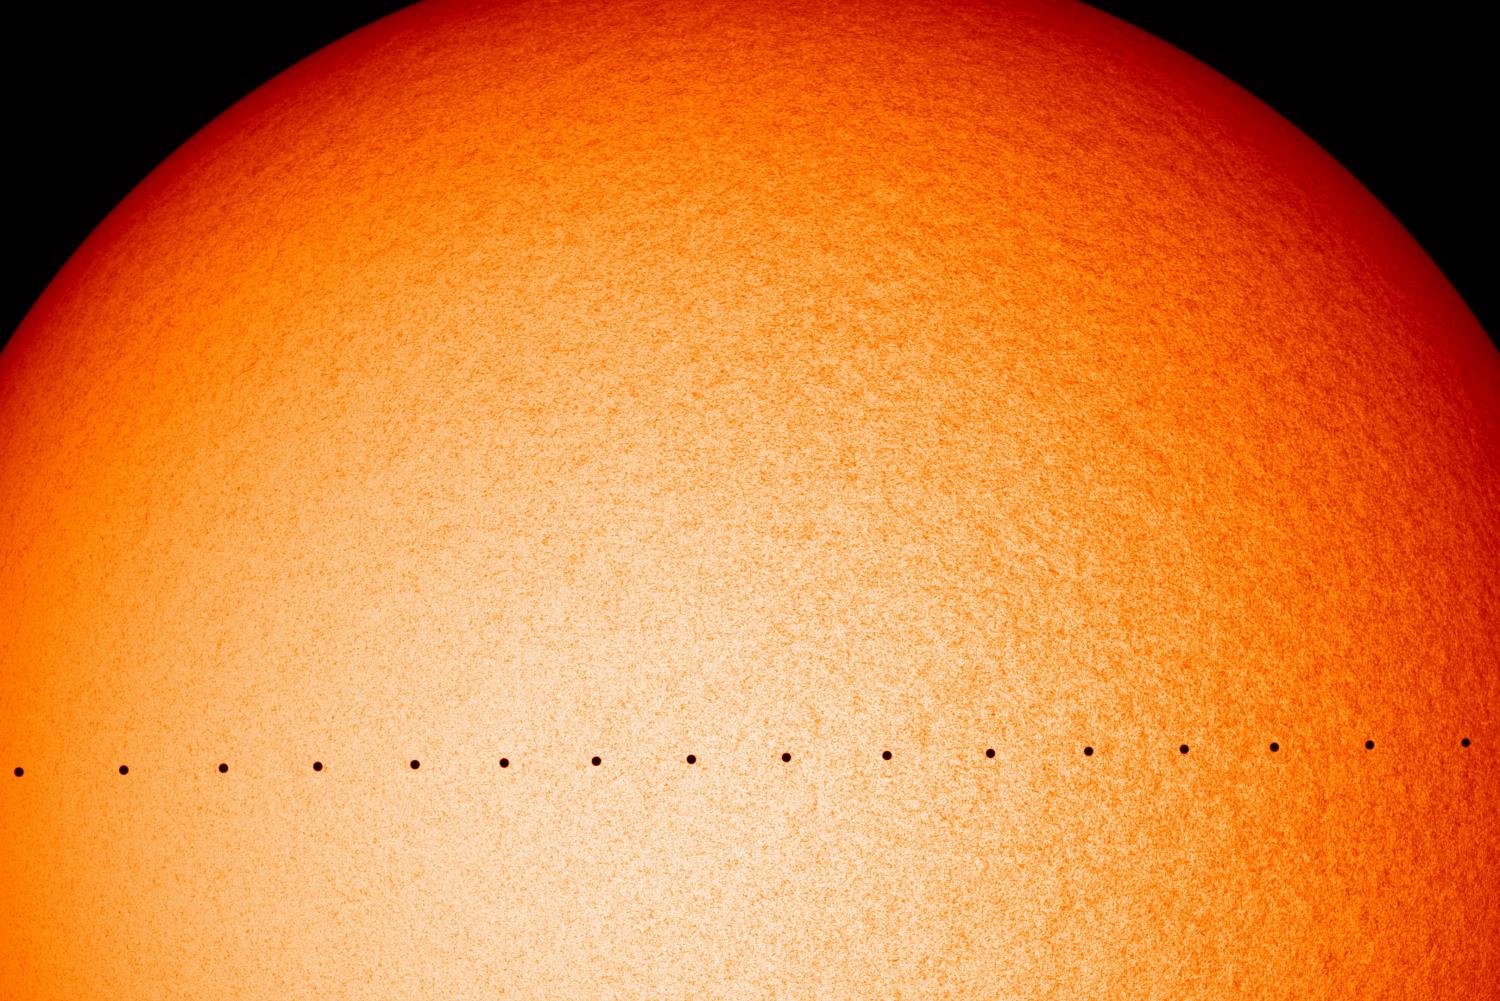 Composite image of Mercury's transit in front of the Sun